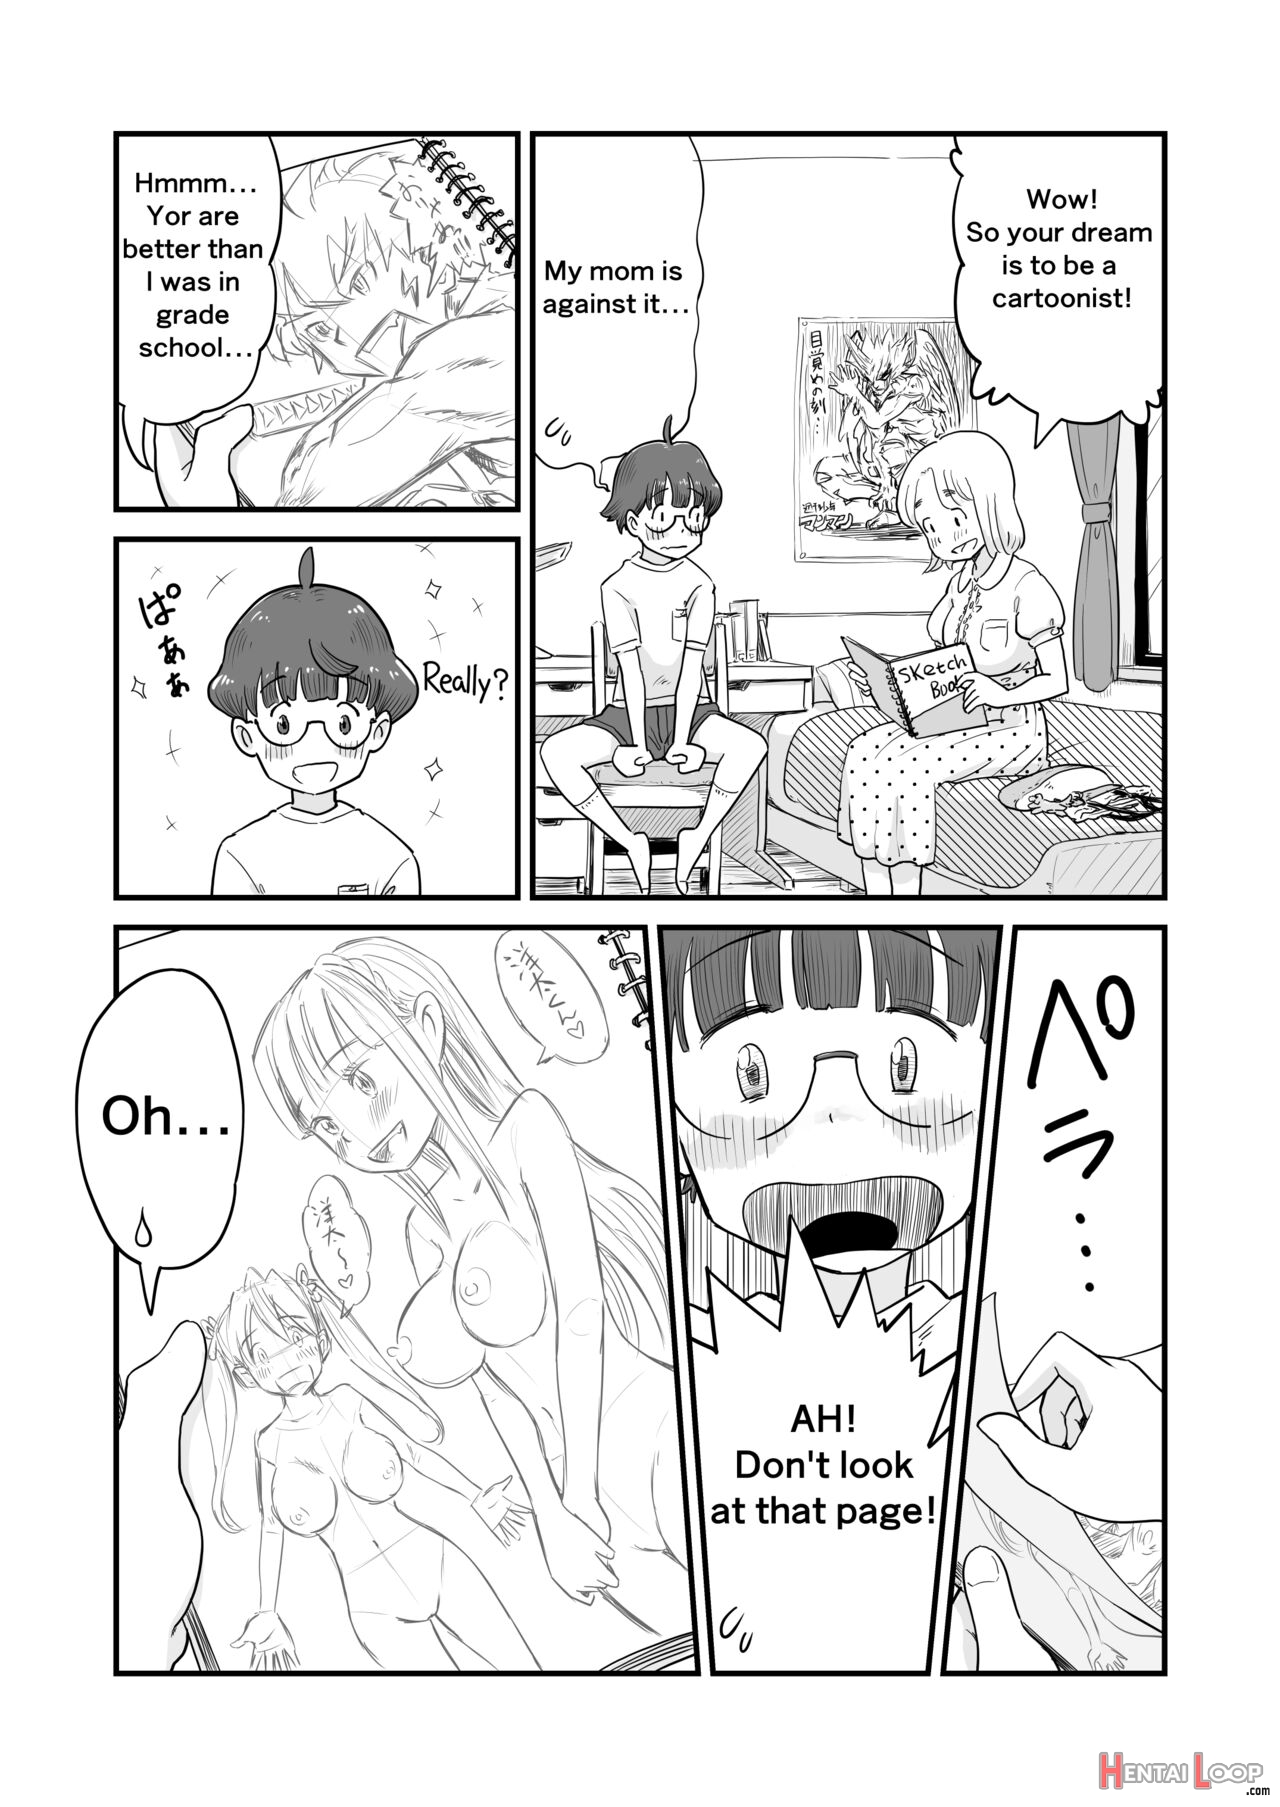 My Sister Is A Doujinshi Artist Of One-shota. page 18